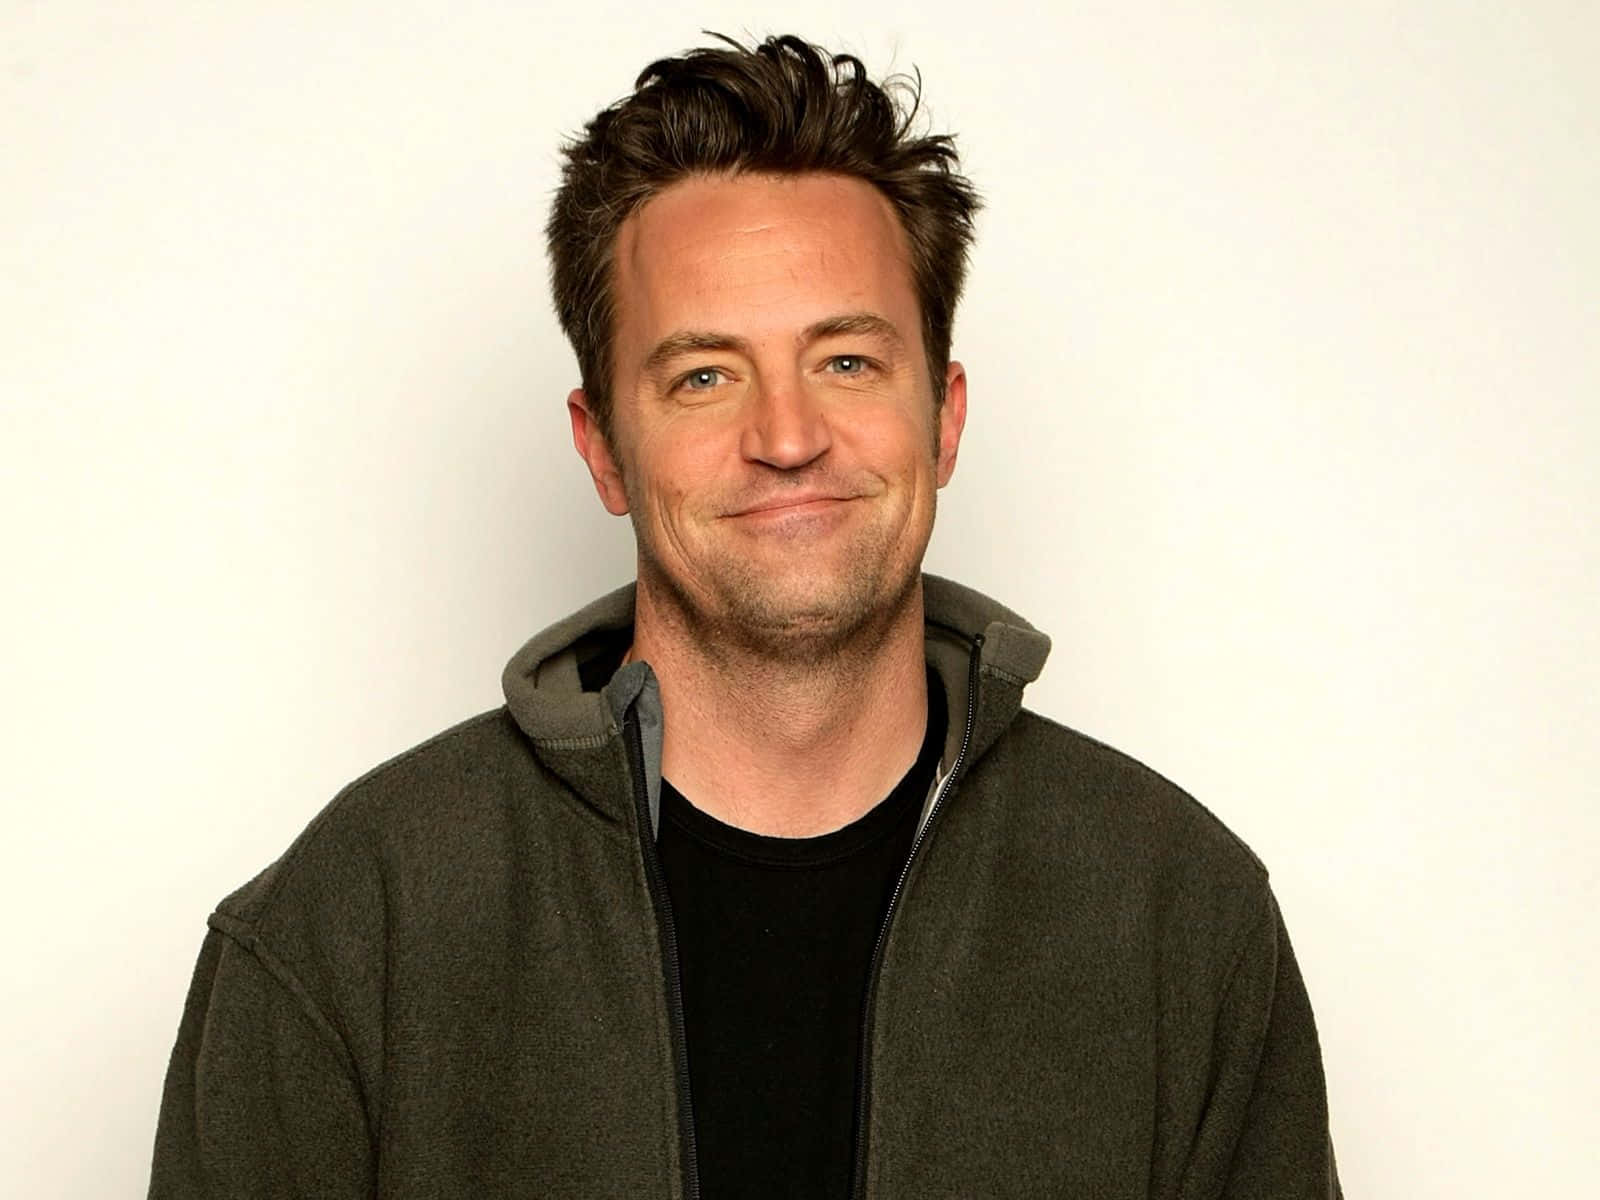 Matthew Perry, The Funnyman Best Known For His Role As Chandler Bing On Friends